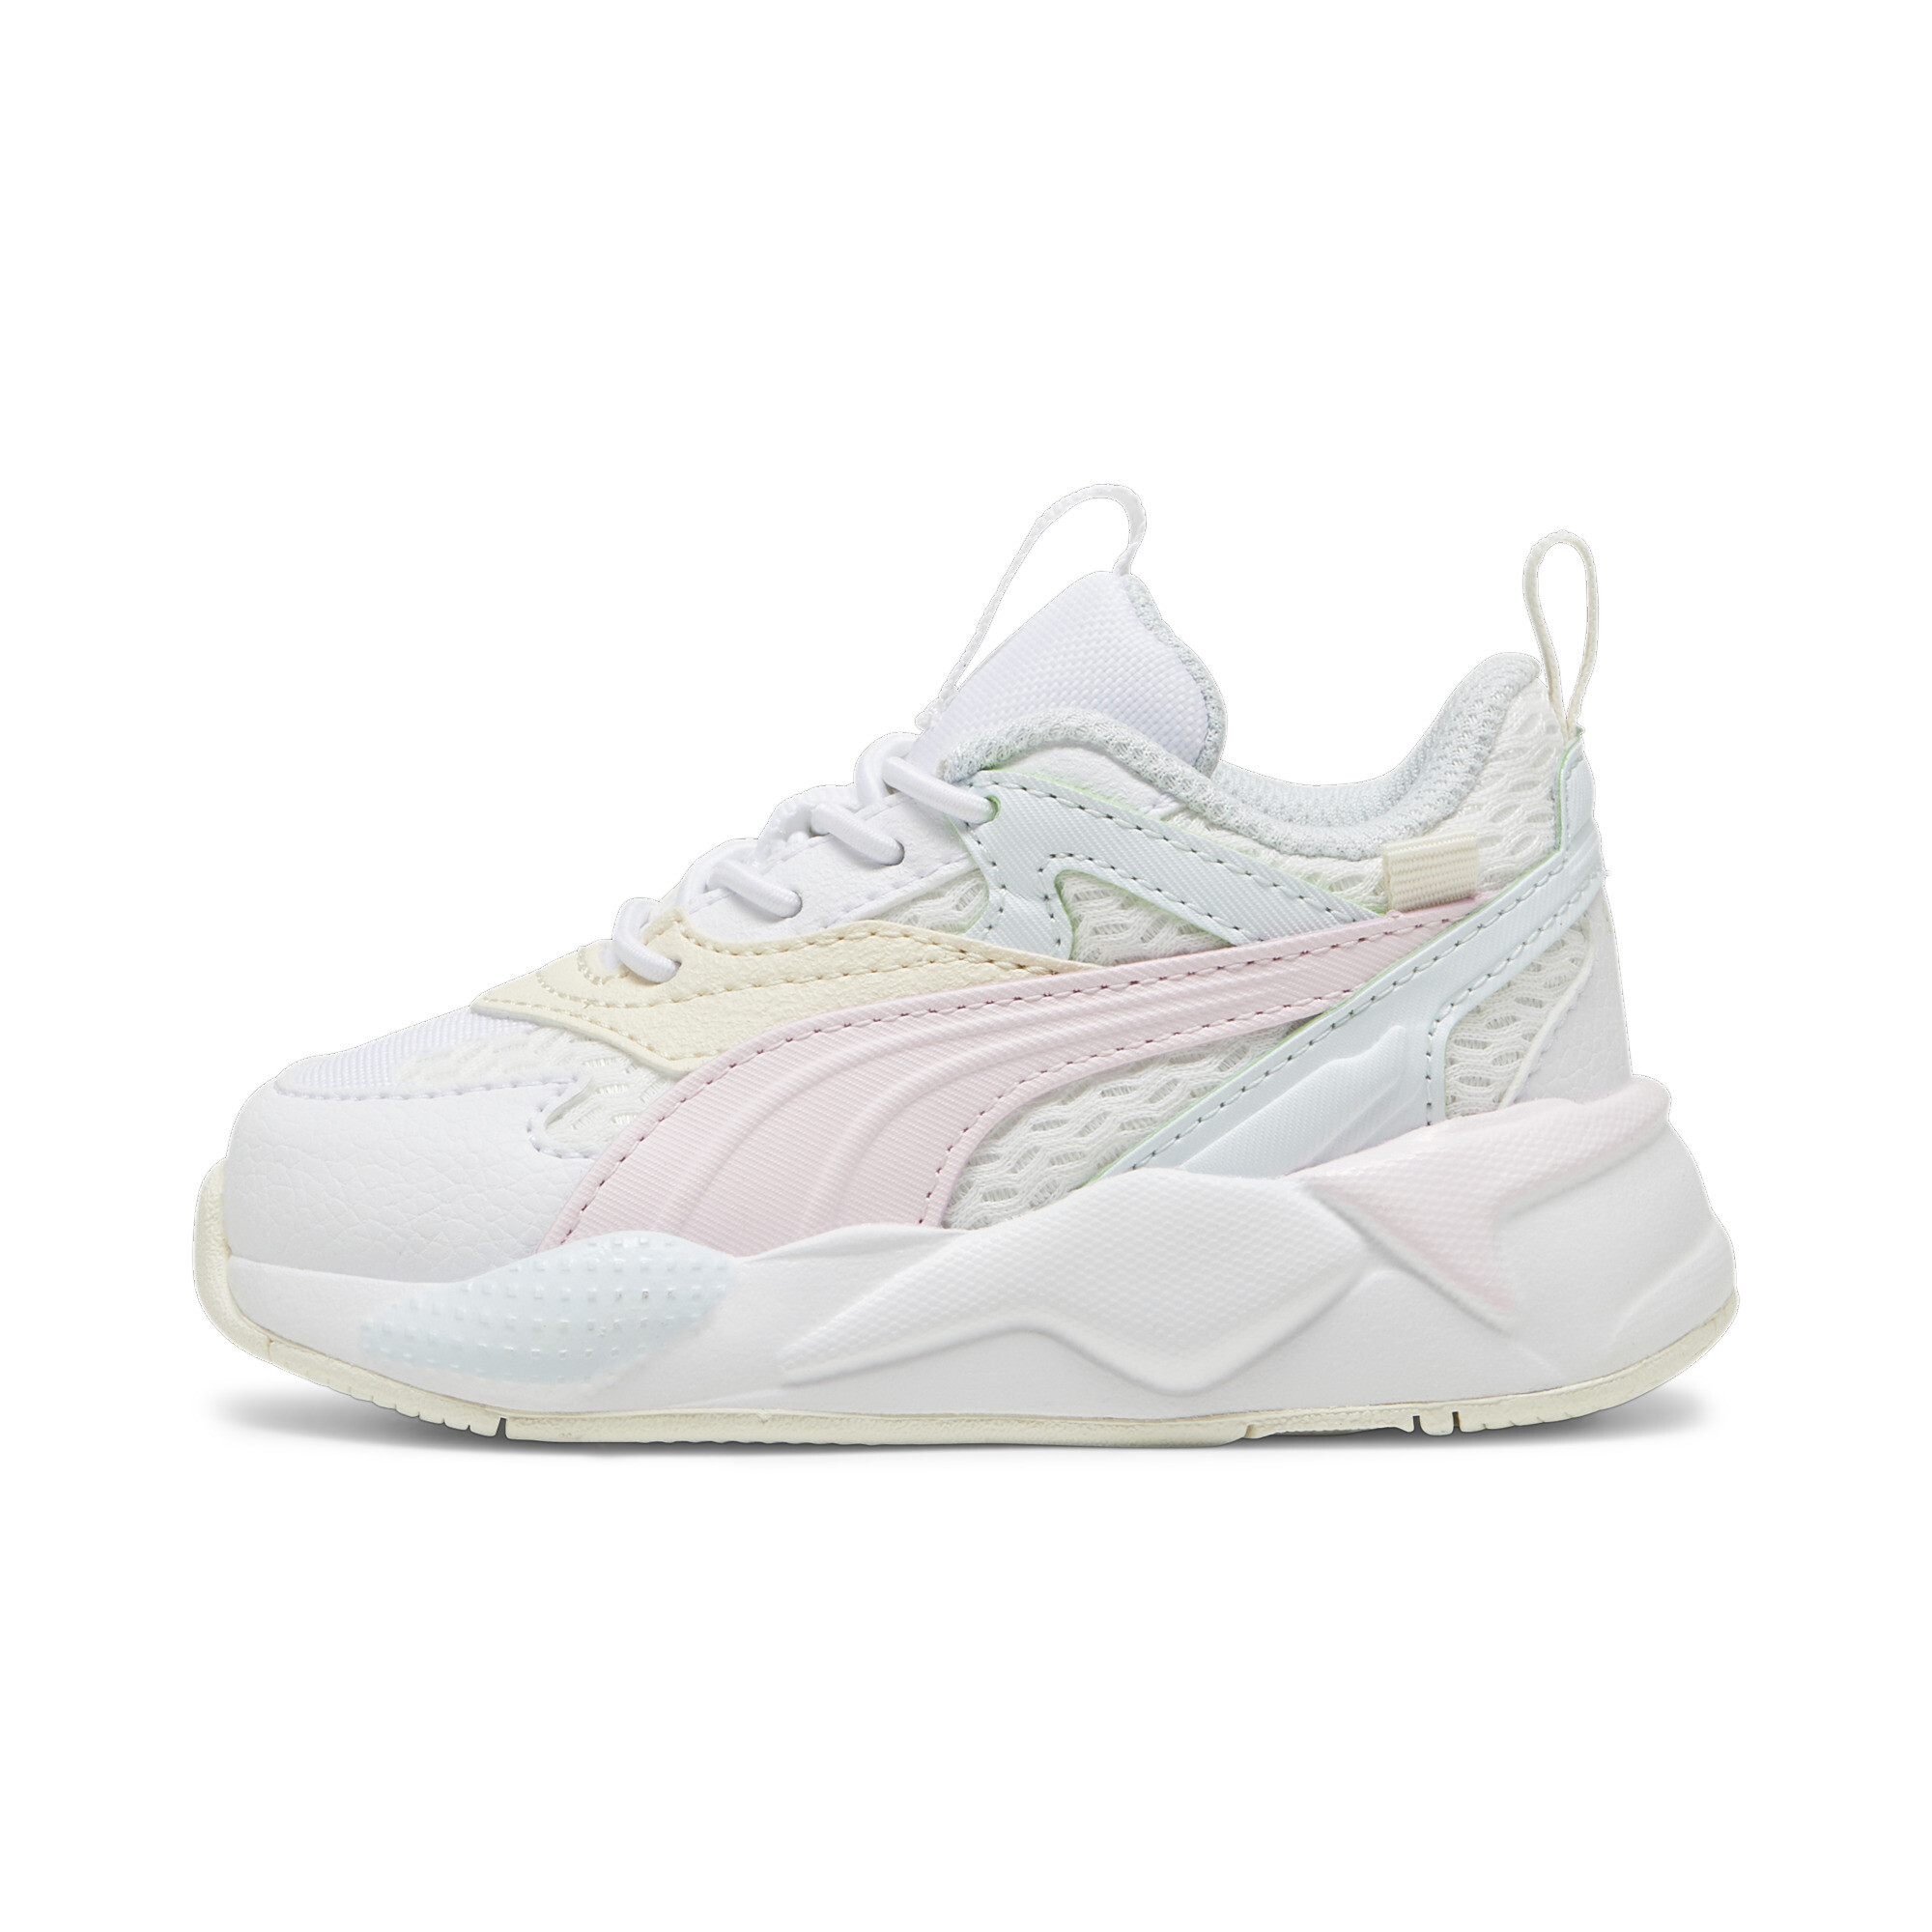 Puma RS-X Efekt Toddlers' Sneakers, White, Size 19, Shoes